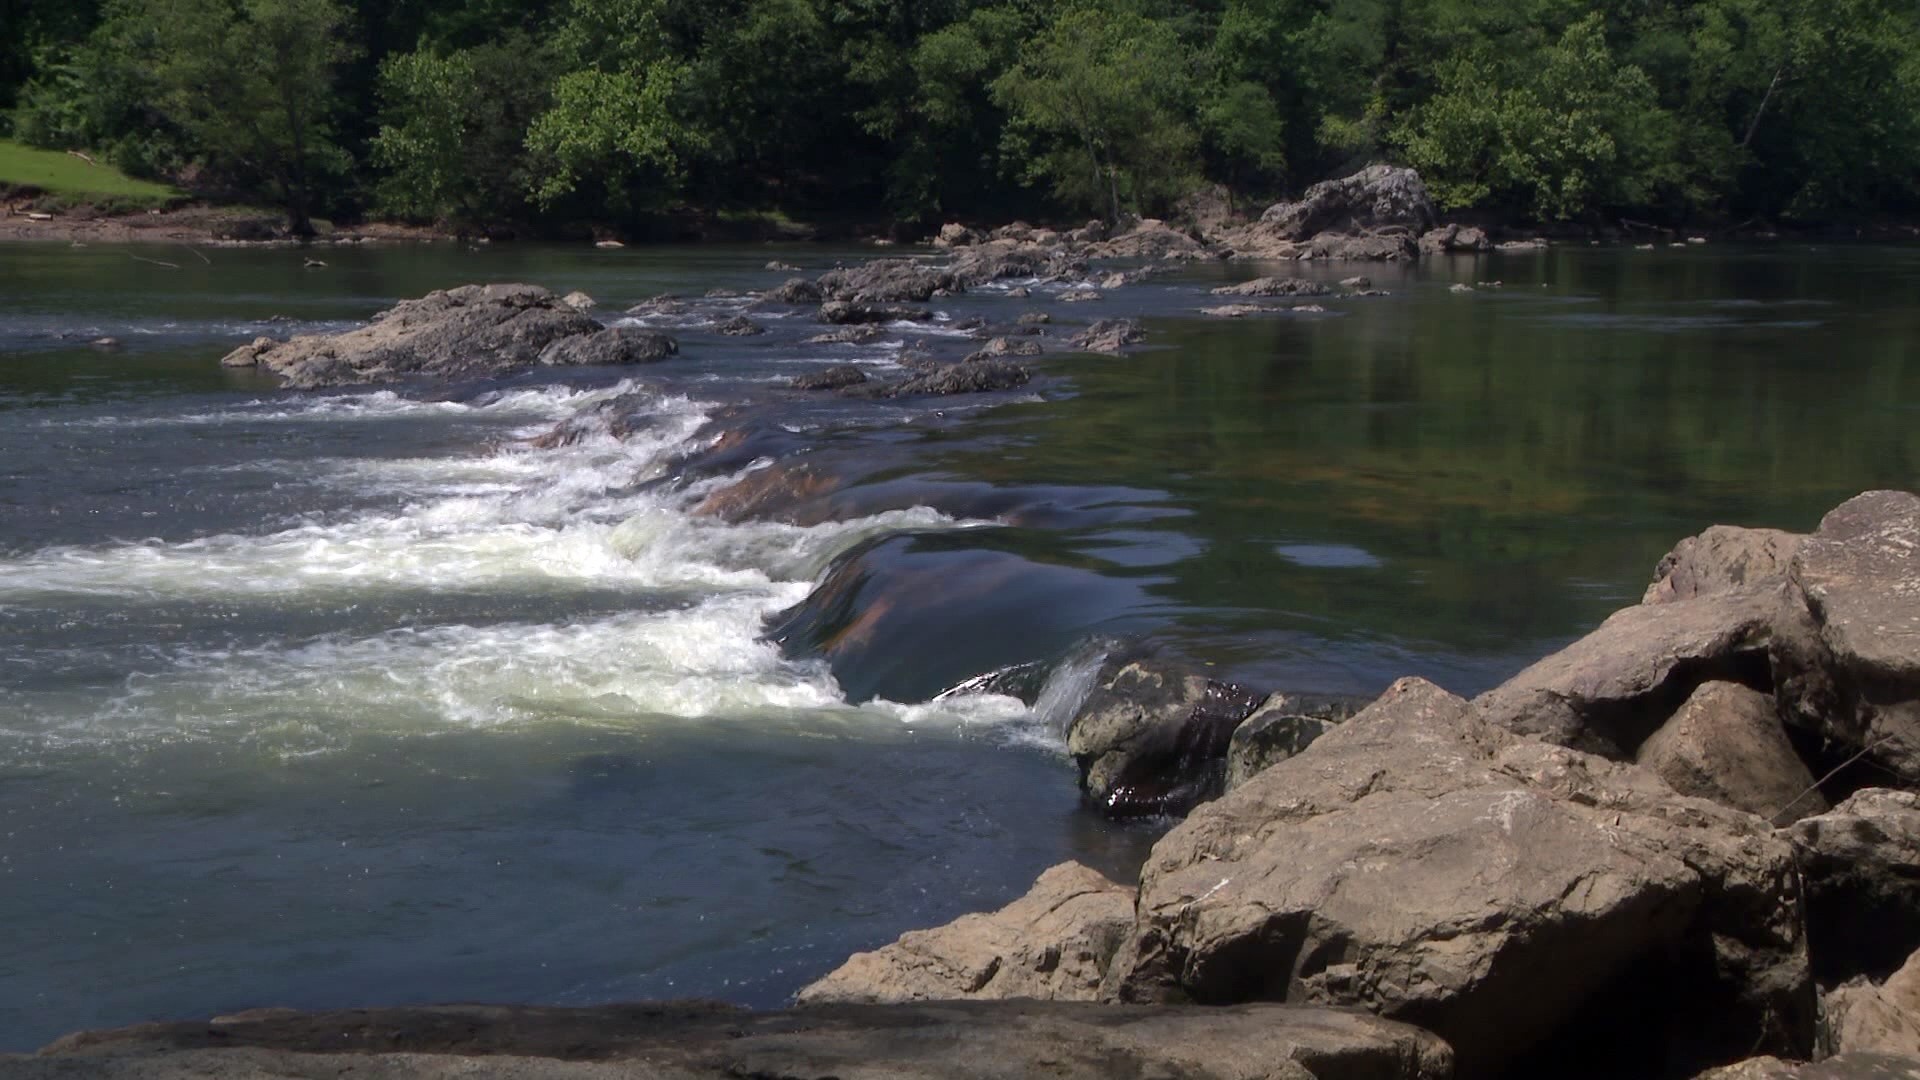 After two people drowned over the weekend, officials in Arkansas want to remind everyone on the water to keep safety top of mind and remember to wear a life jacket.